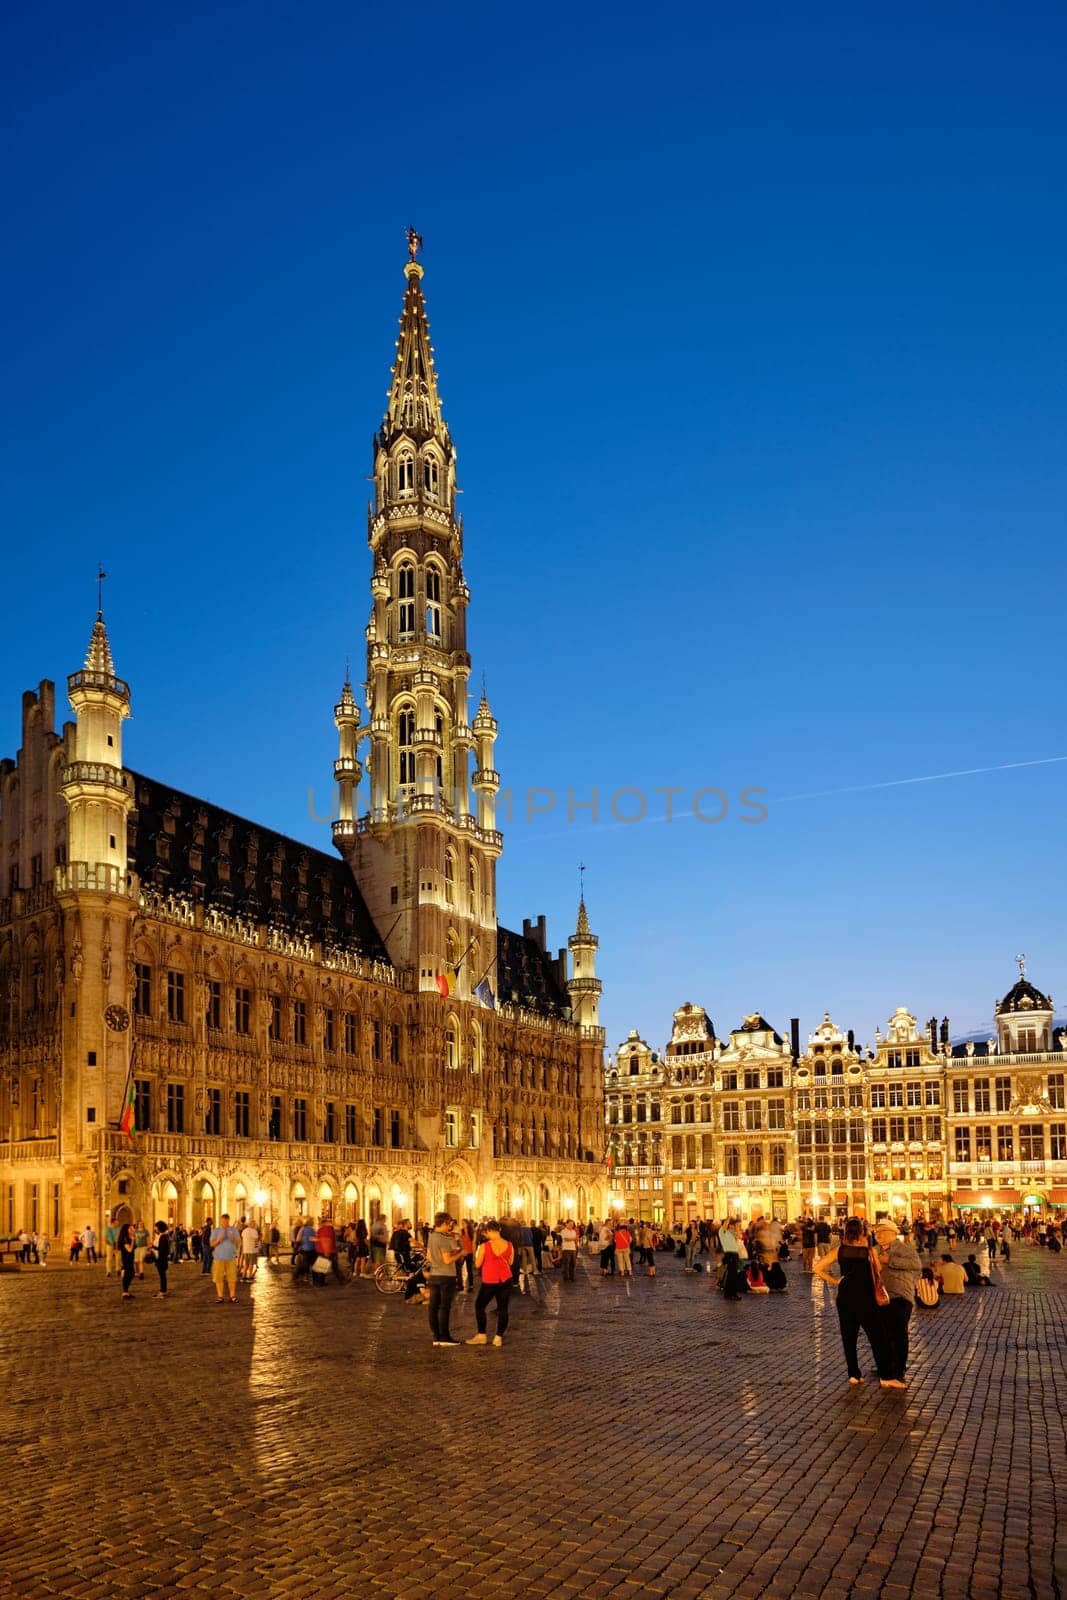 Brussels Bruxelles Grote Markt Grand Place square illuminated at night , Belgium by dimol